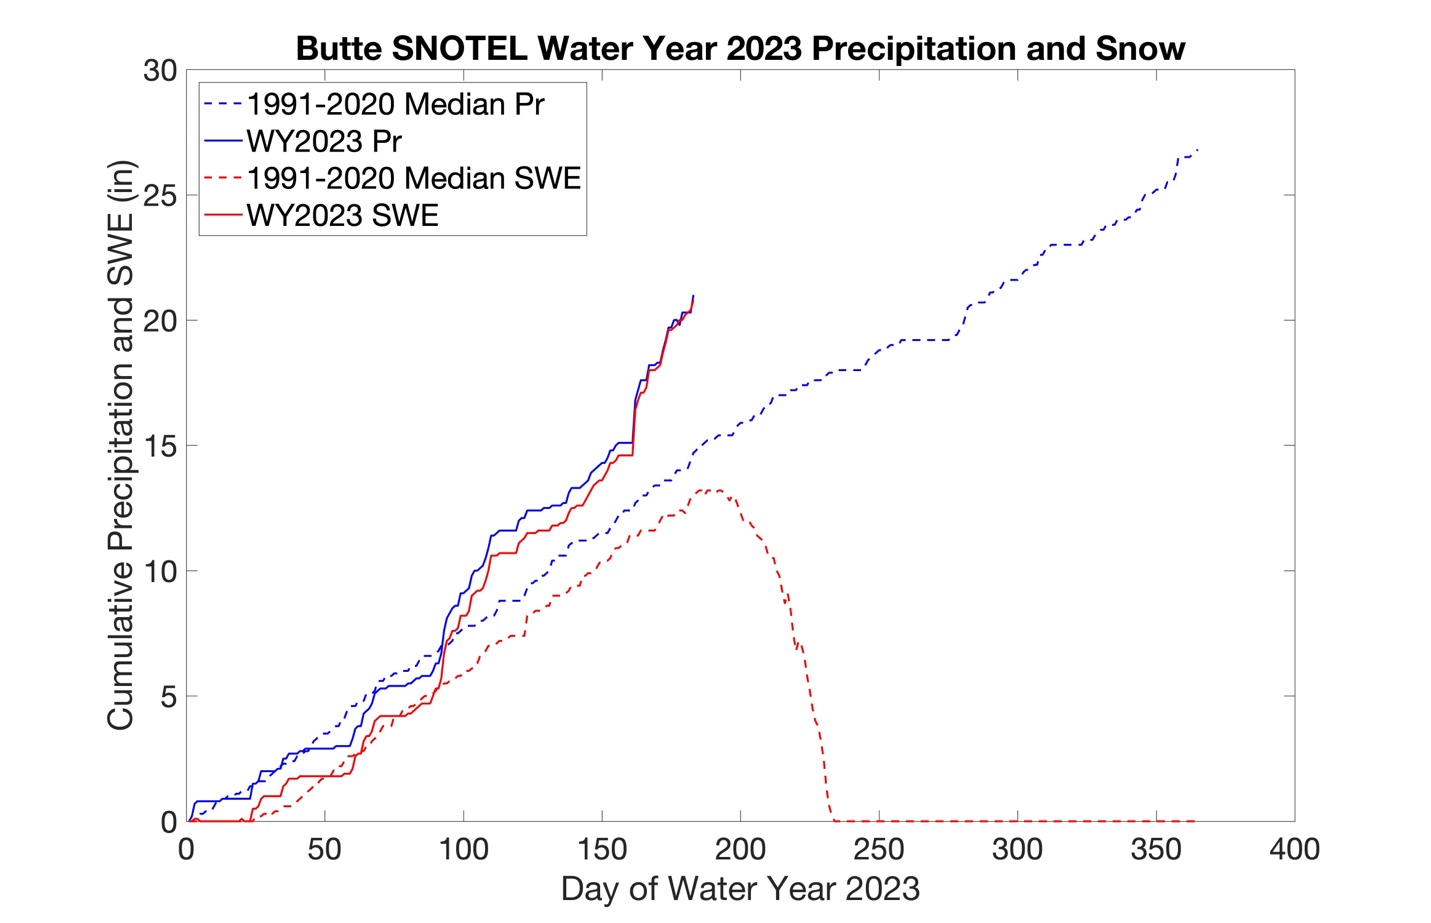 Plot shows four different lines: 1991-2020 Median Pr, WY2023 Pr, 1991-2020 Median SWE, and WY2023 SWE